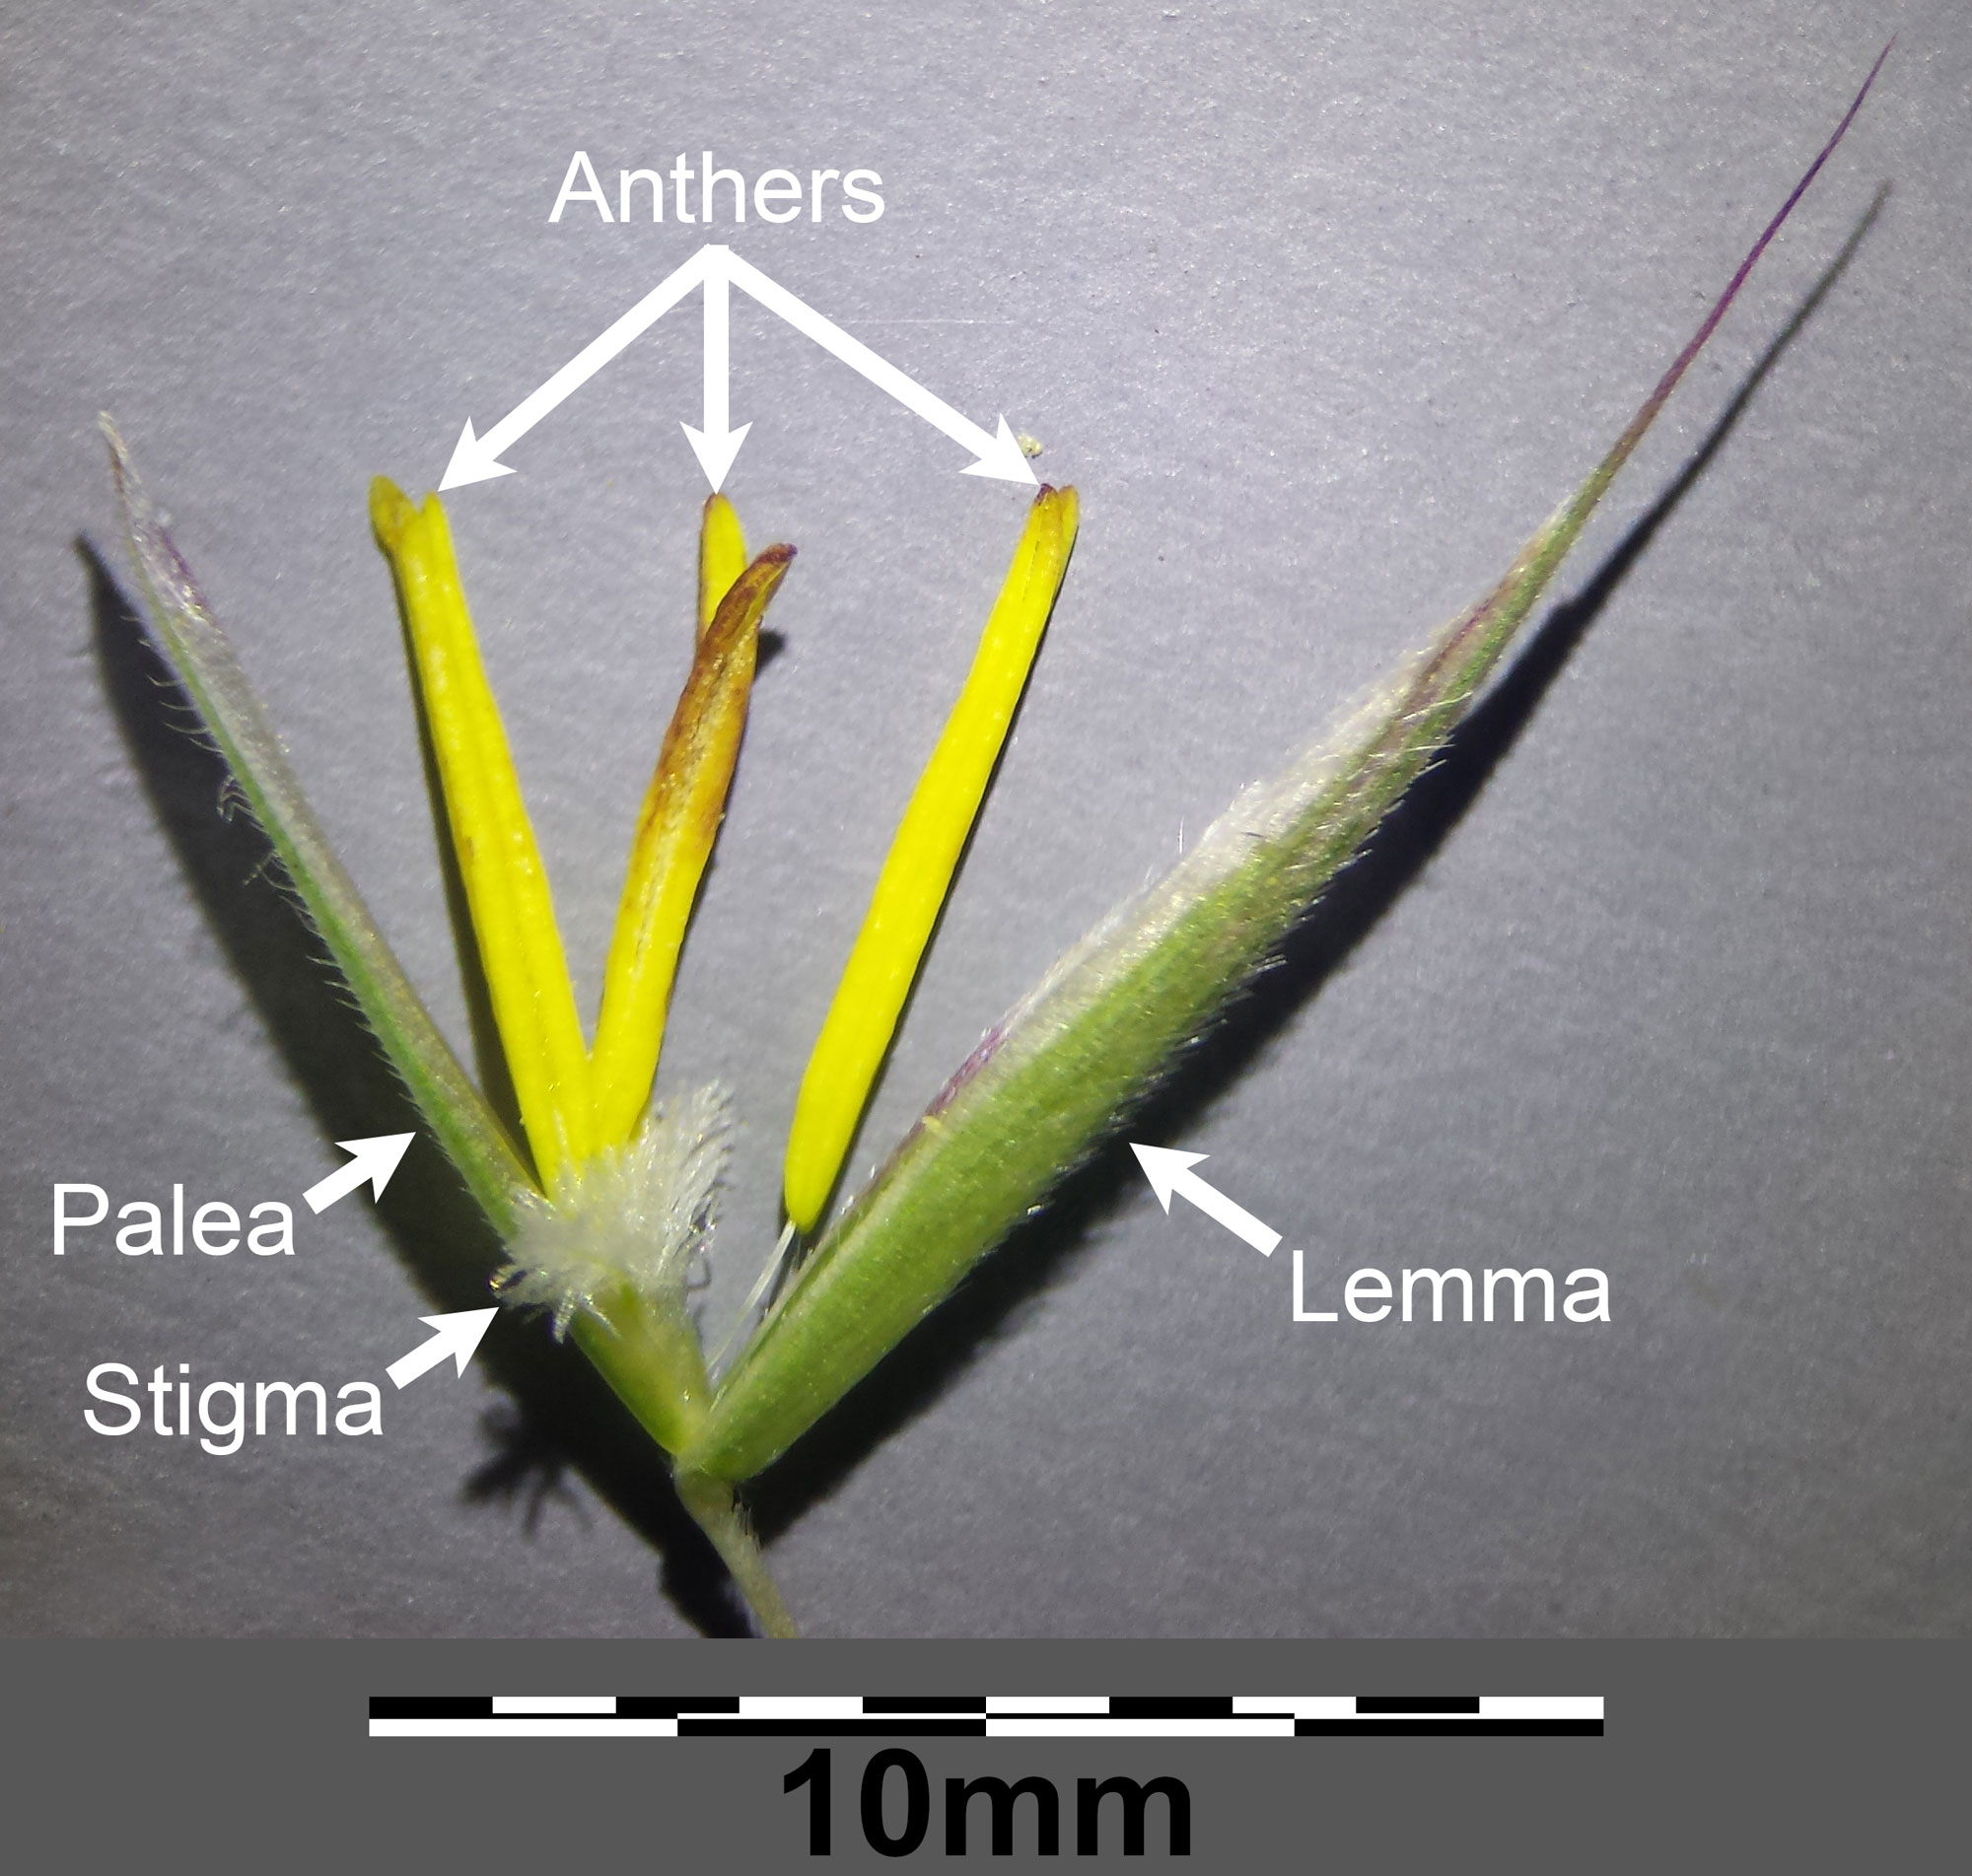 Photograph of a bisexual floret of erect brome opened to show the parts, including lemma, palea, stigma, and anthers. Scale bar is 10 millimeters.